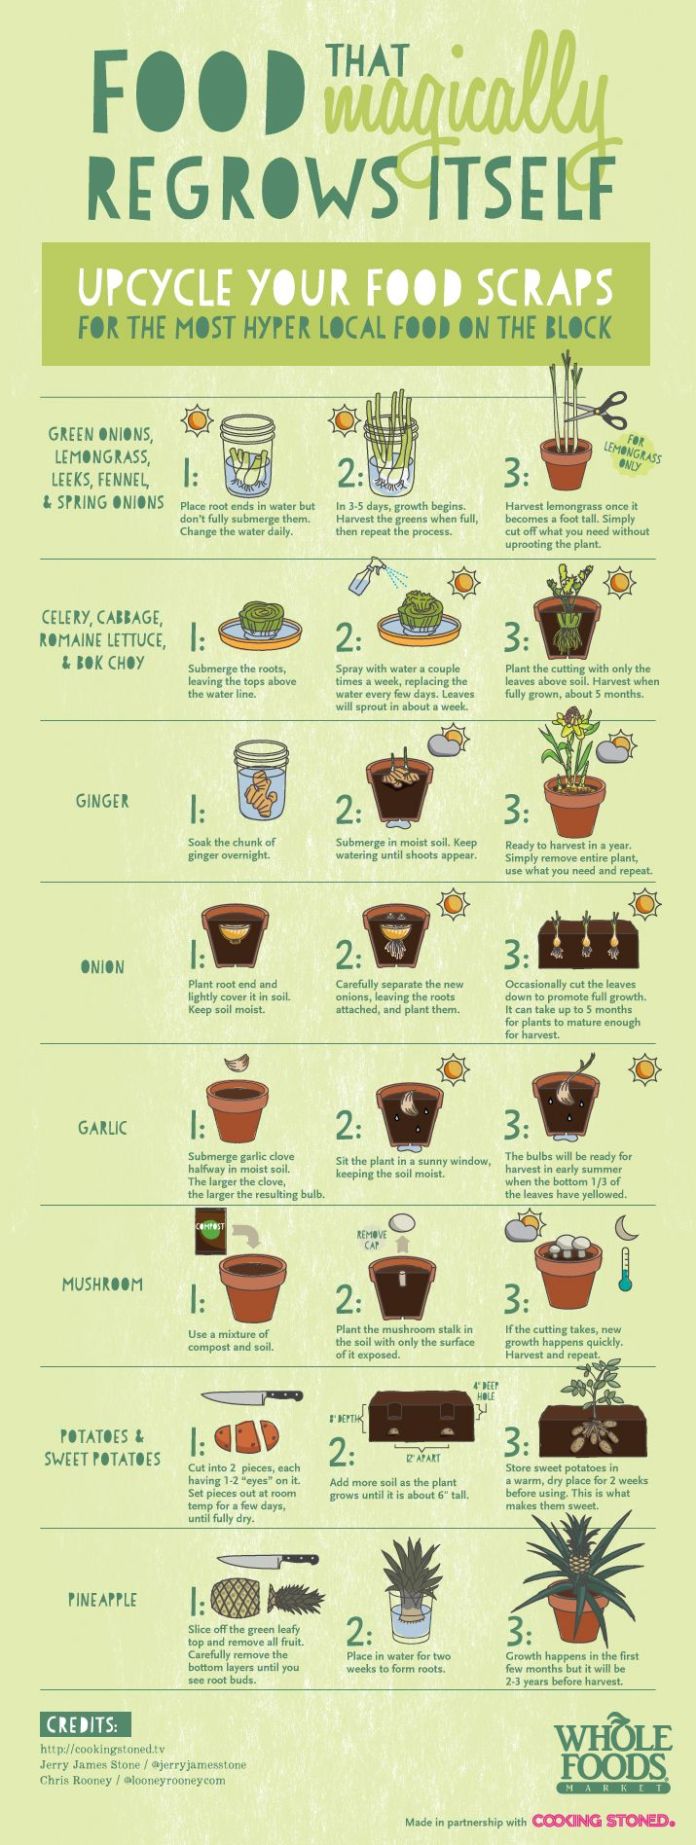 guide to upcycling food scraps